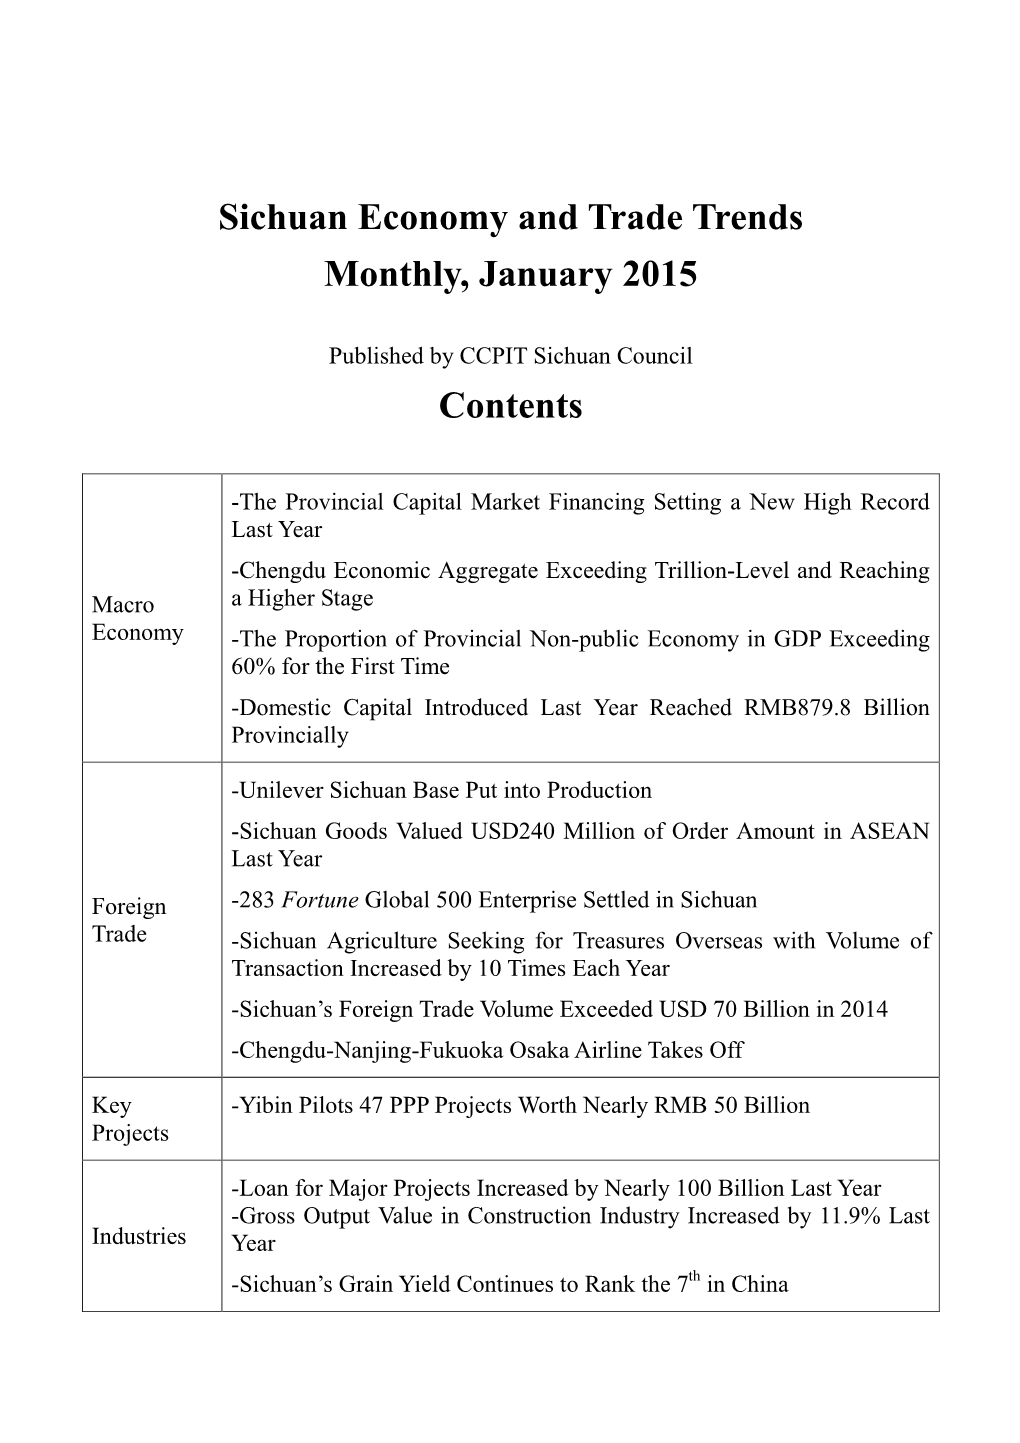 Sichuan Economy and Trade Trends Monthly, January 2015 Contents